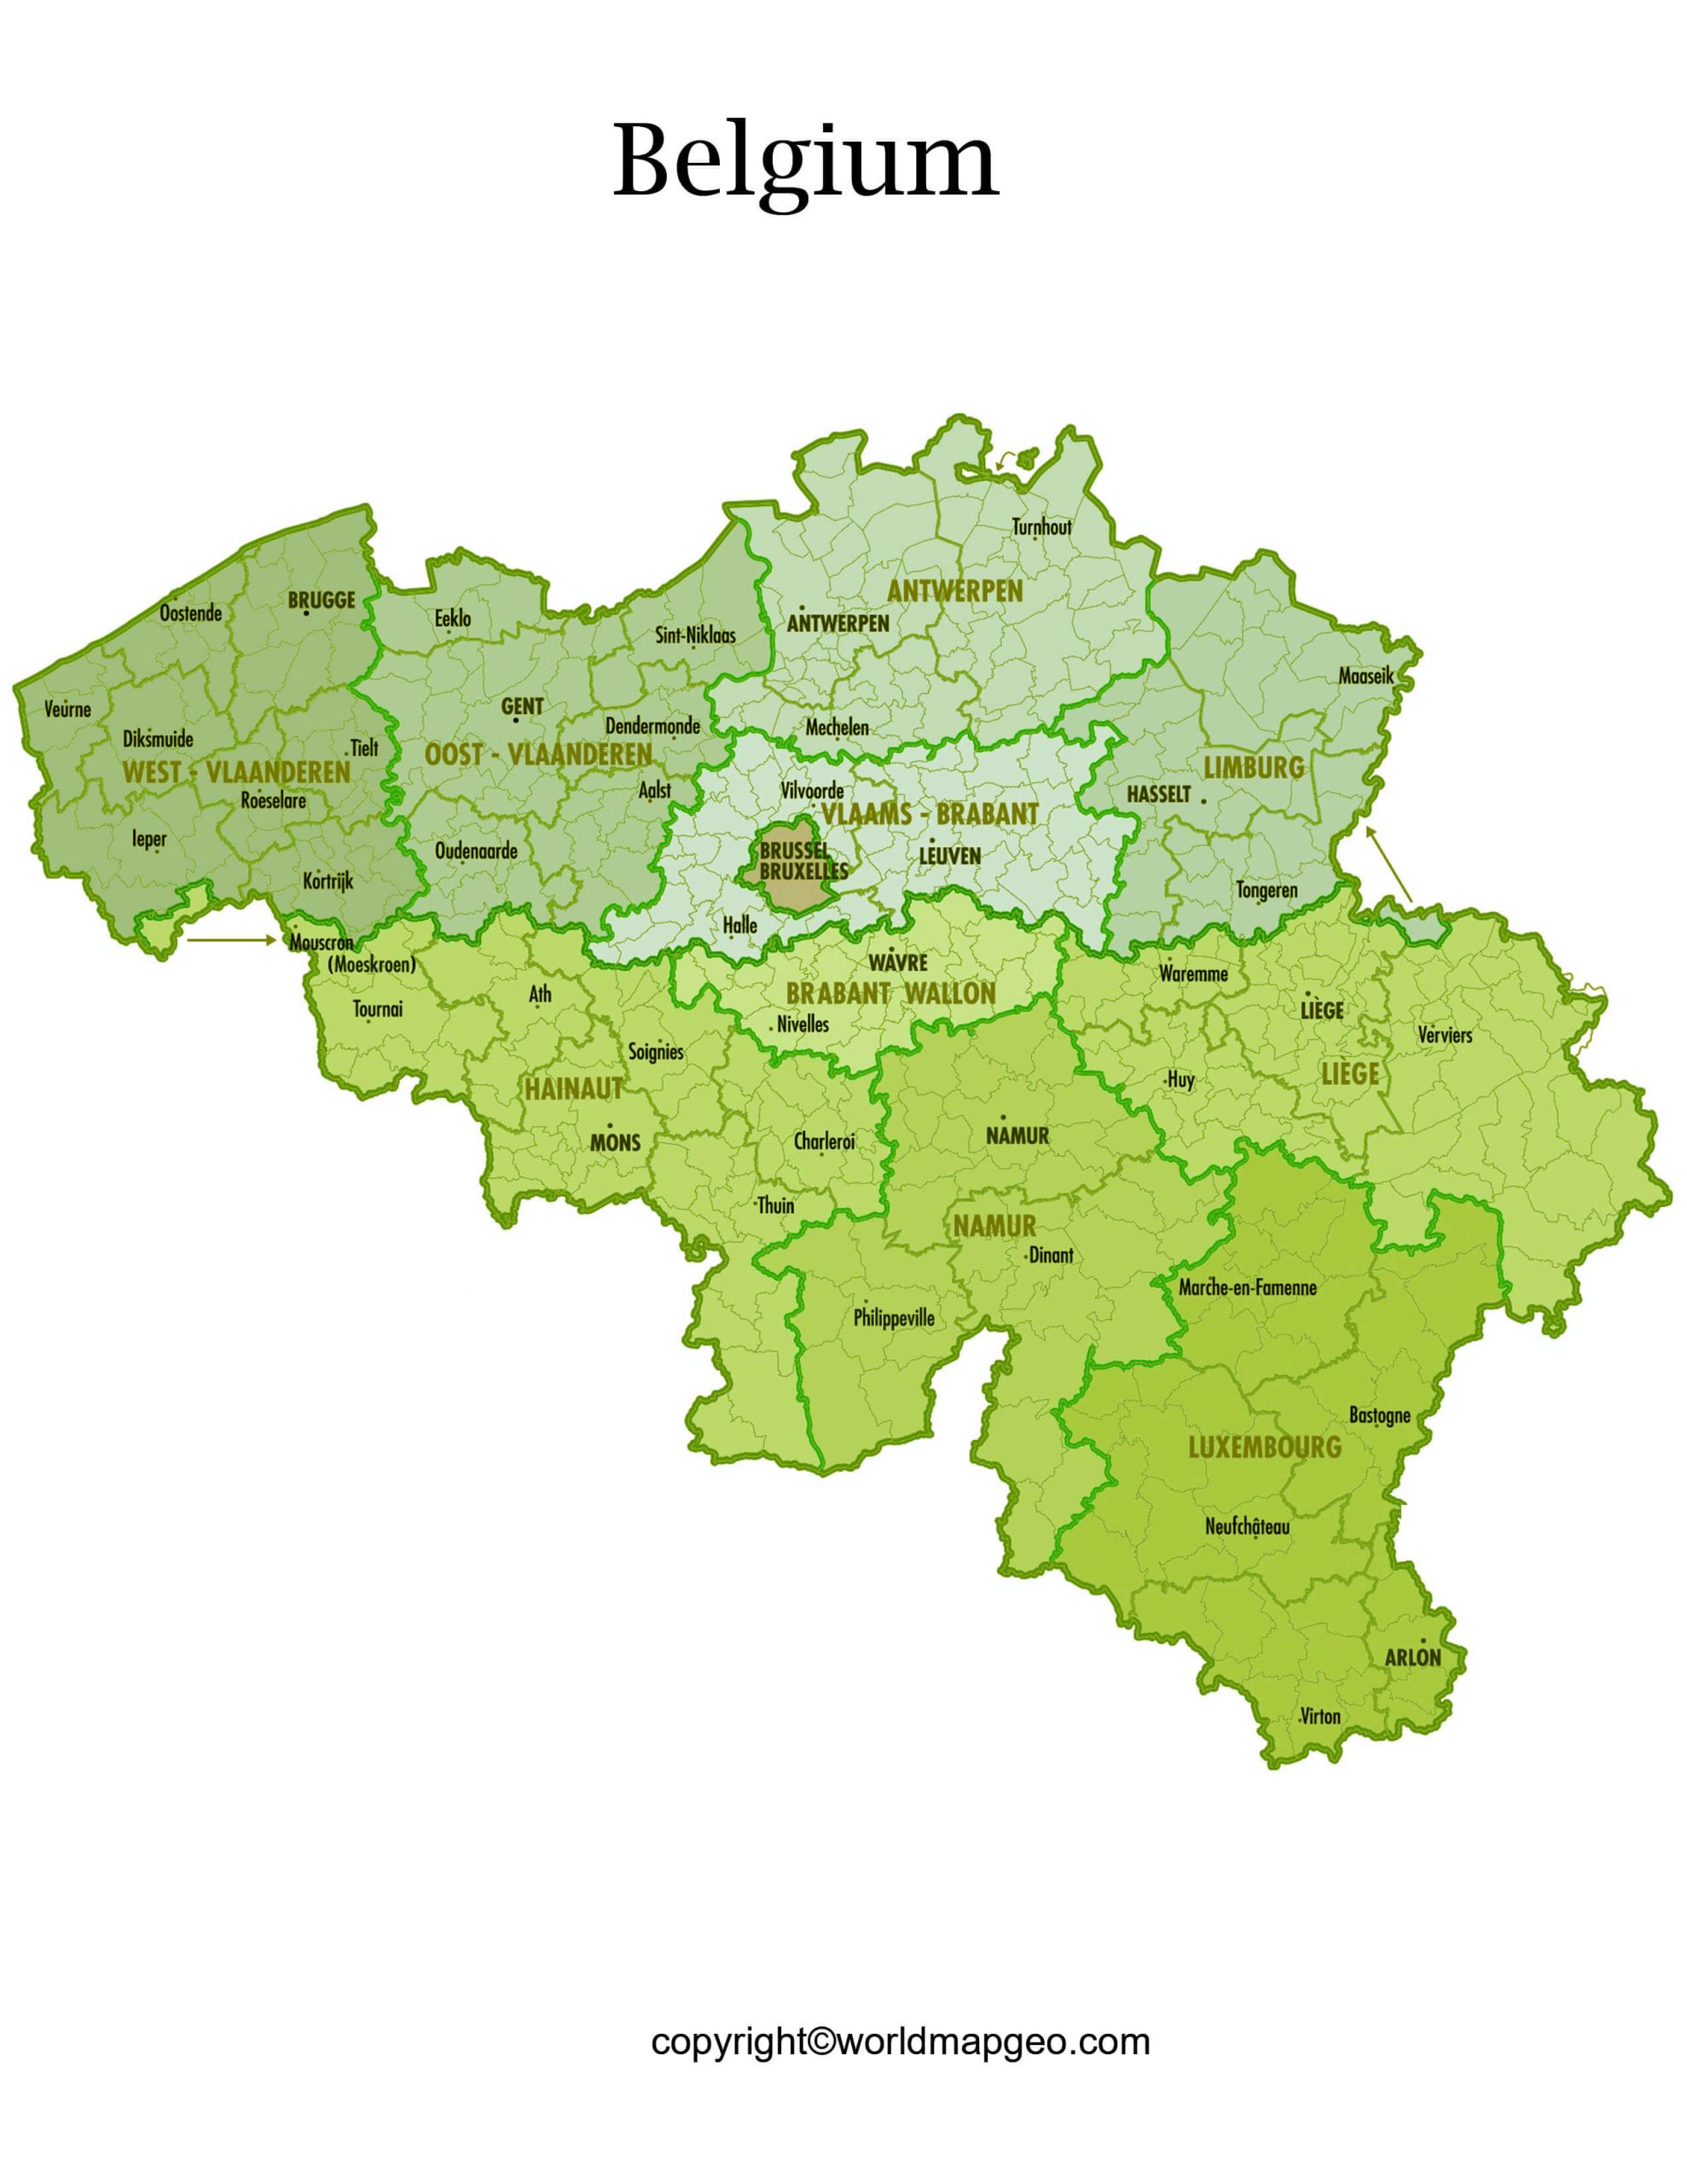 Labeled Belgium Map with States, Capital and Cities